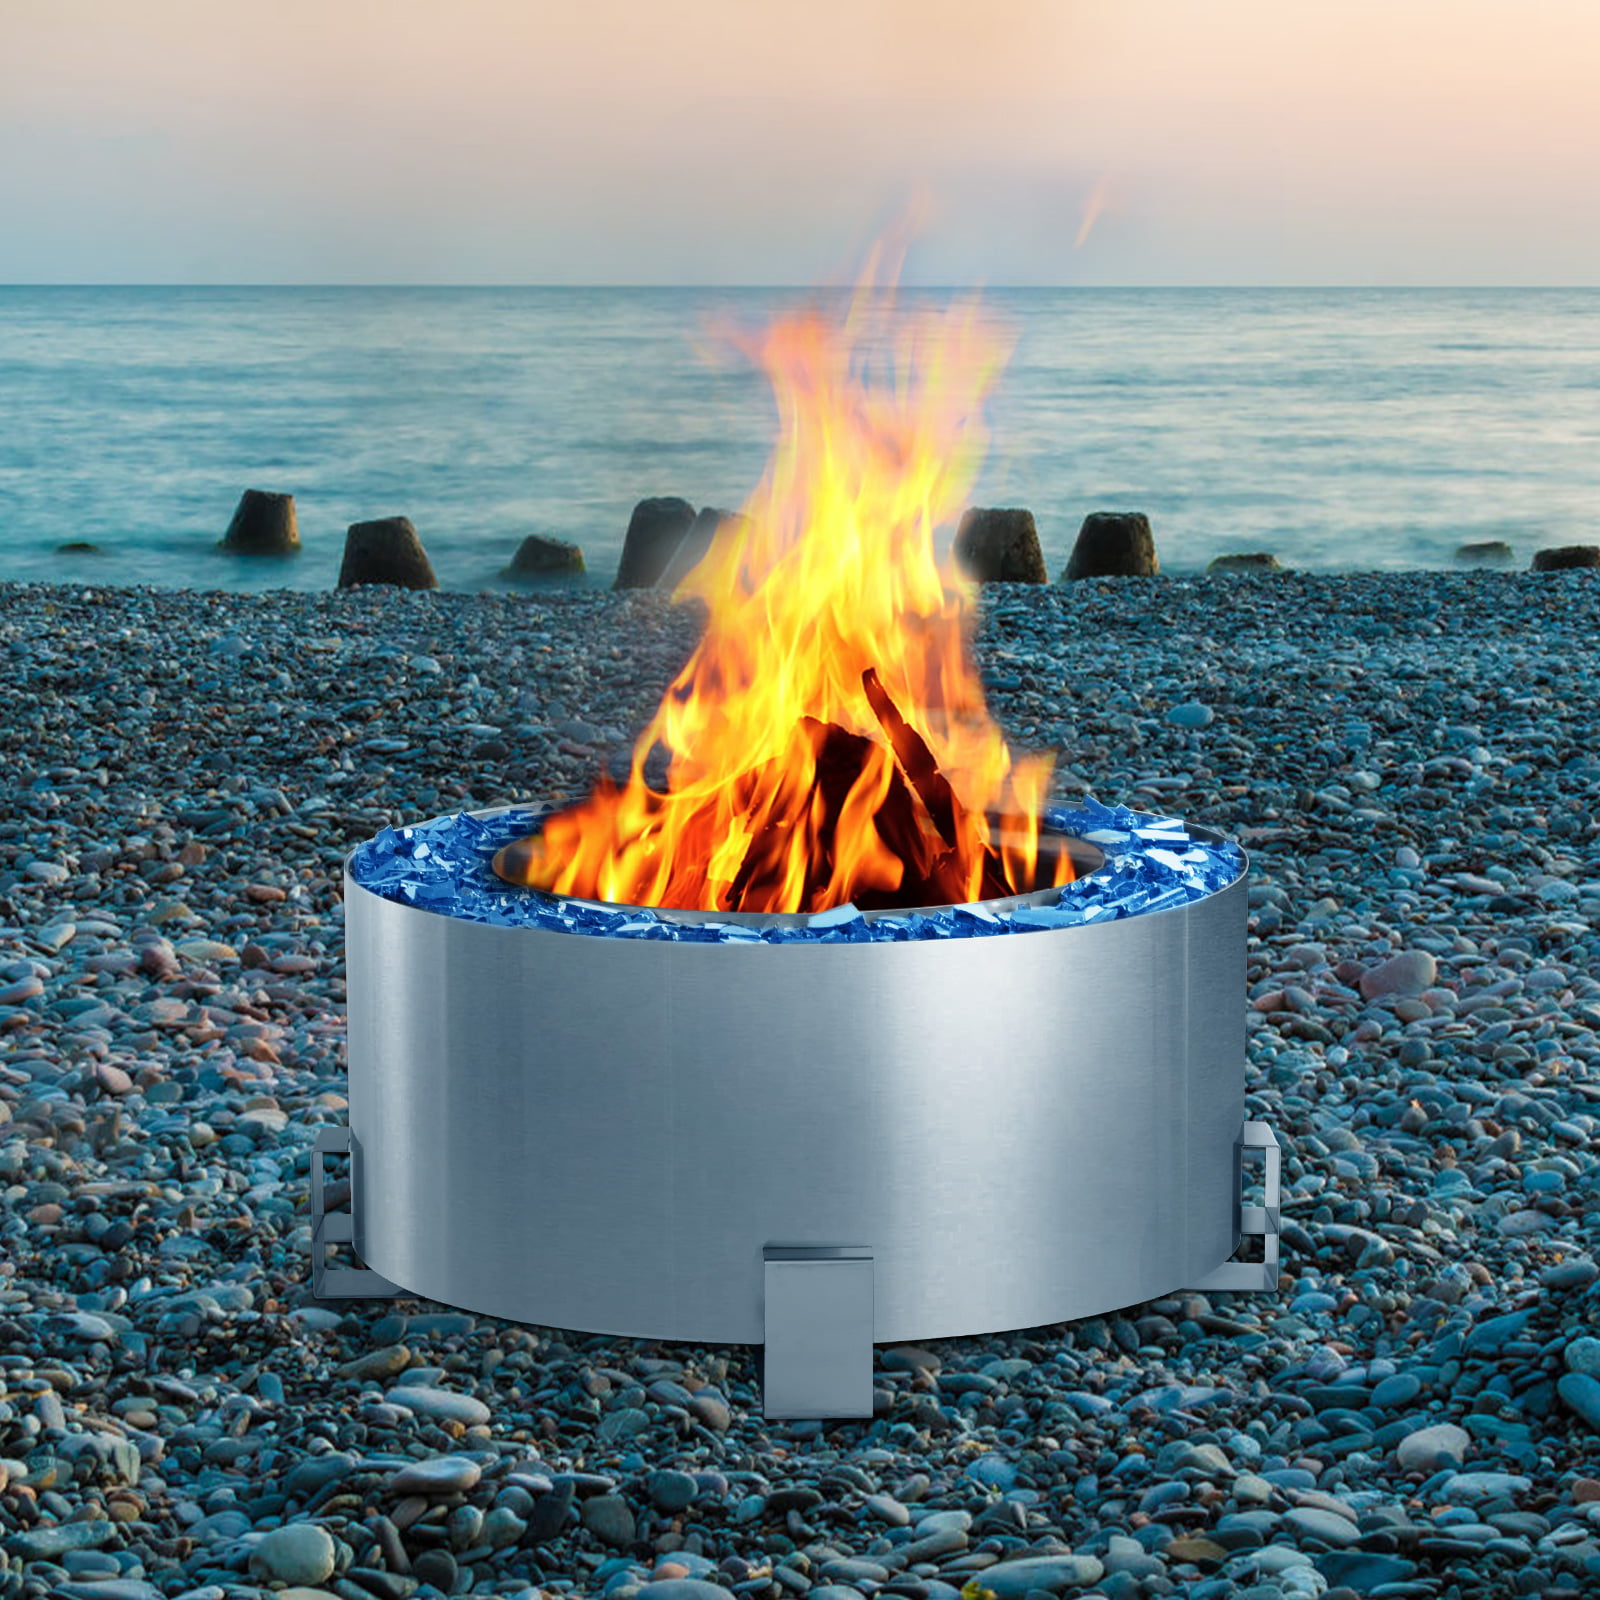 Danrelax 28 5 Fire Pit Outdoor, Fire Pit Without Smoke